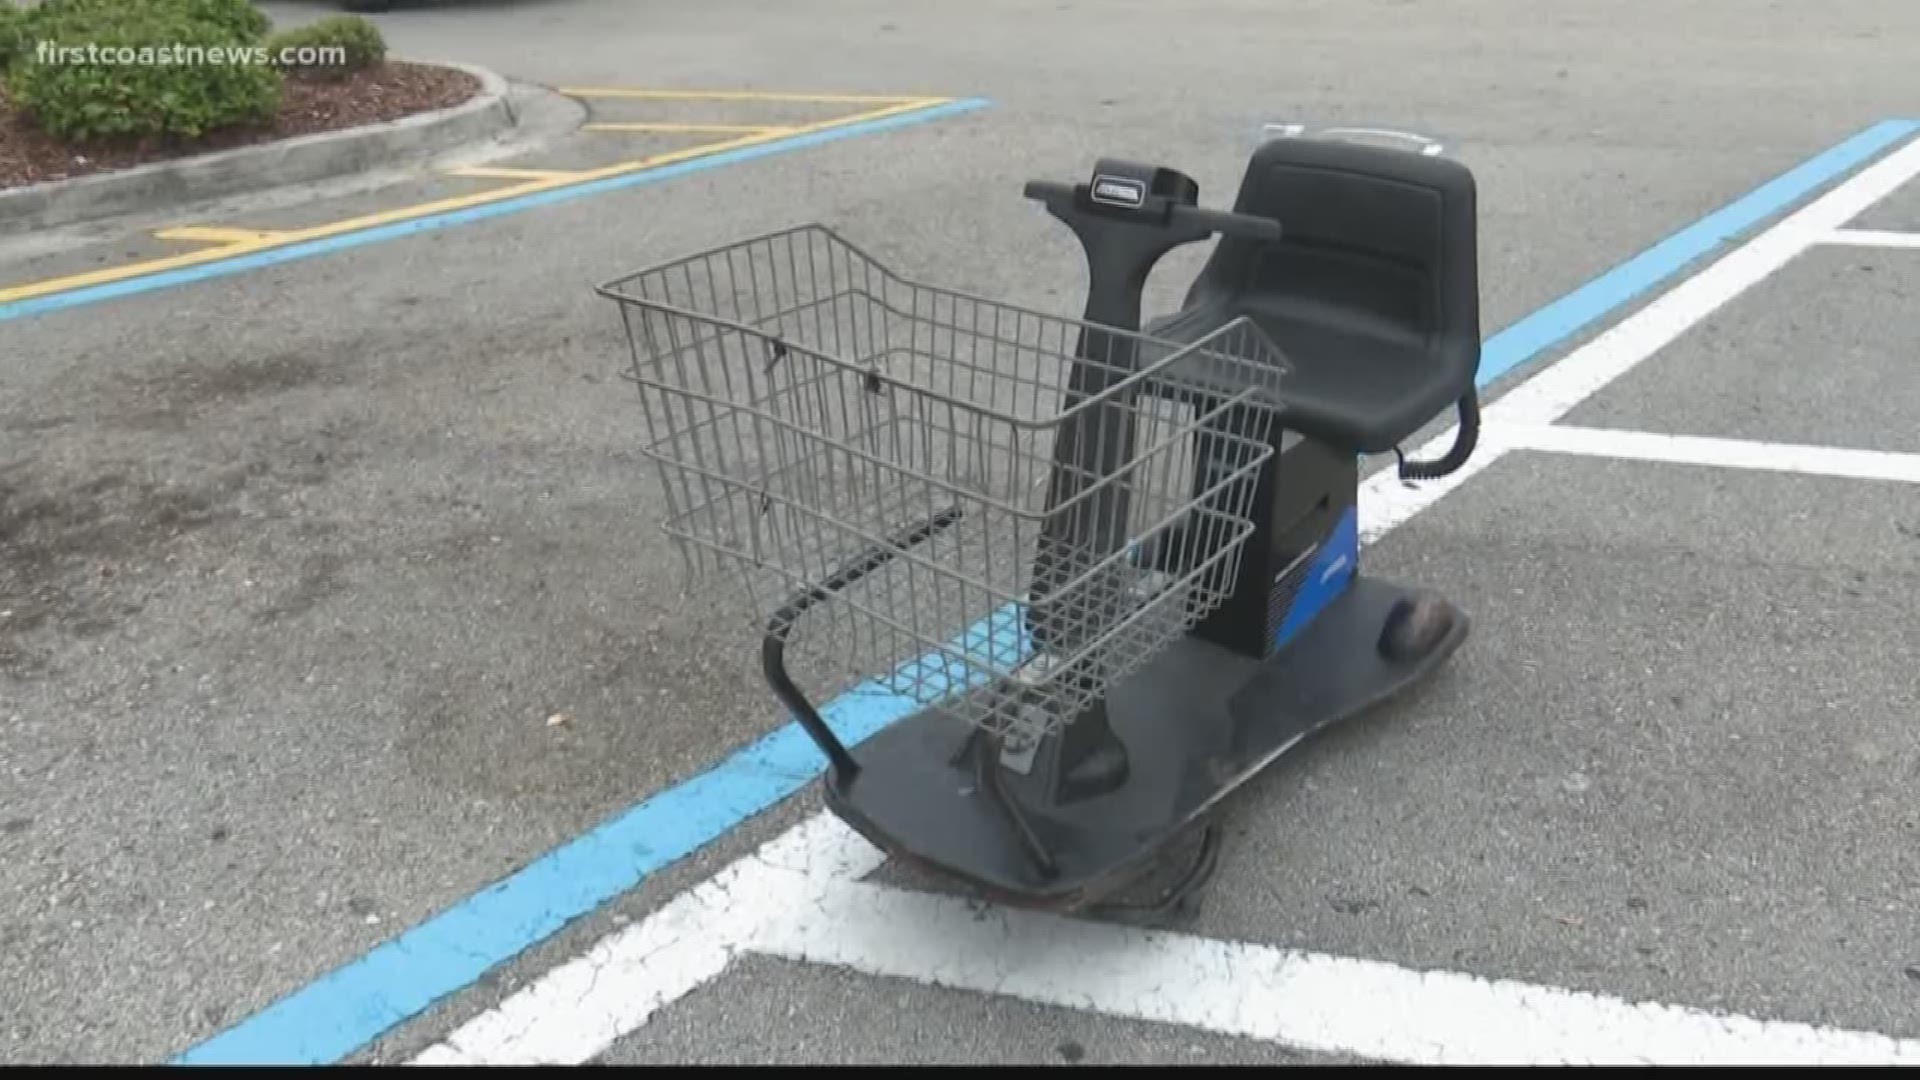 He says he's seen upwards of six people waiting for carts at some Walmart stores.